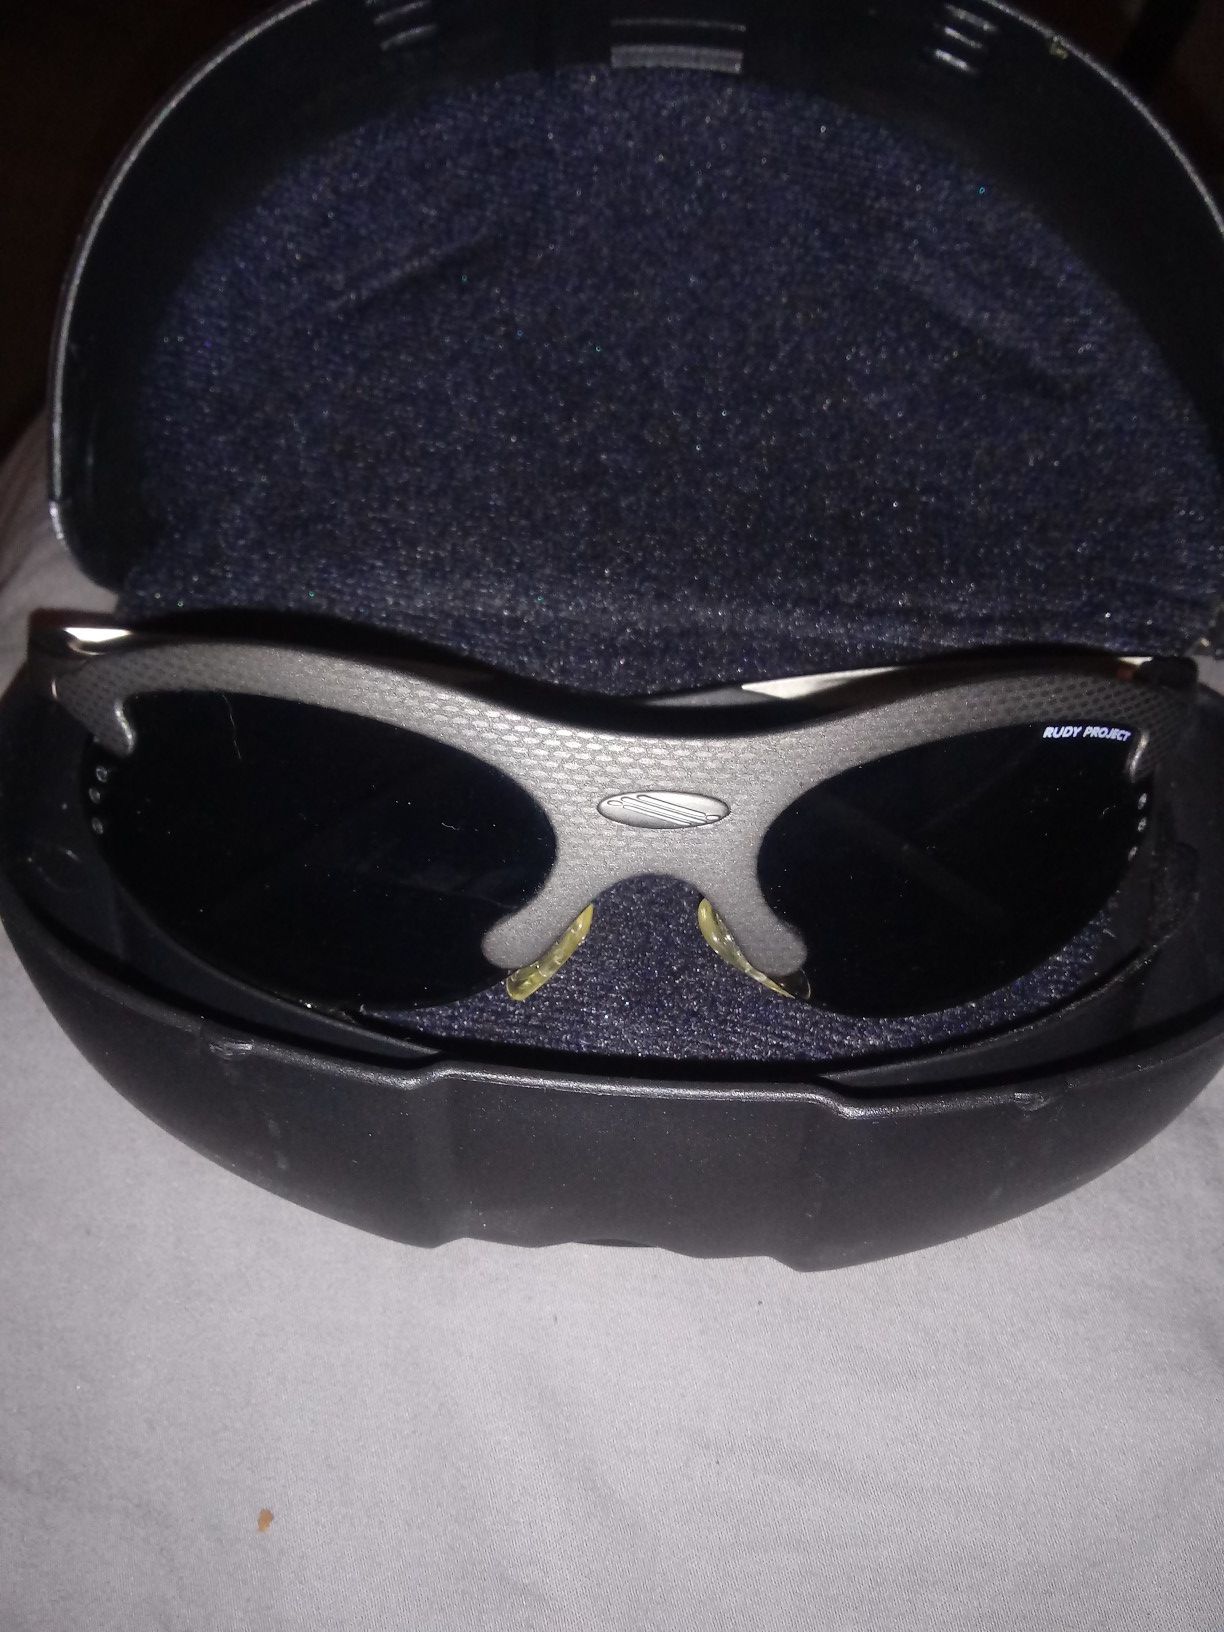 Excellent Condition Rudy Project Made in Italy Shades Great For Bicycle Riding